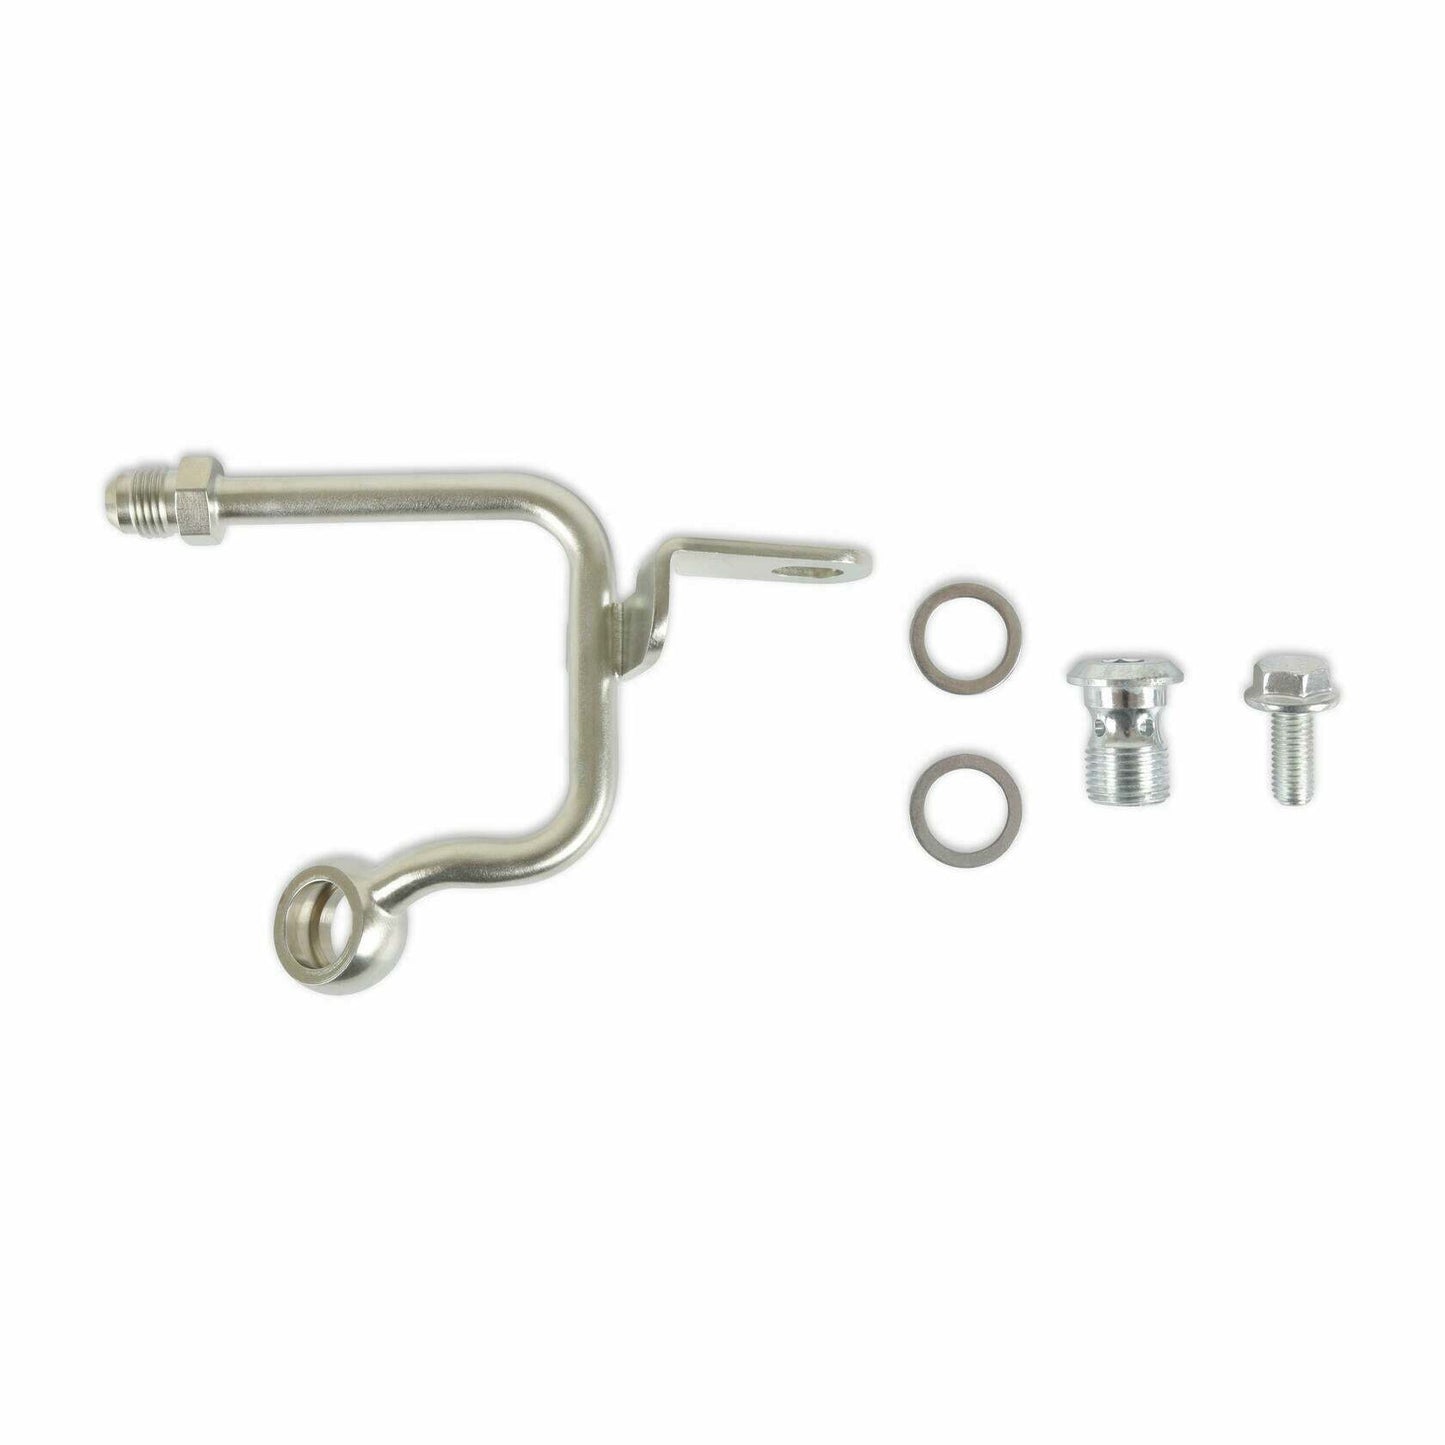 Complete Accessory & Oil System For Oe-Natural-20-310